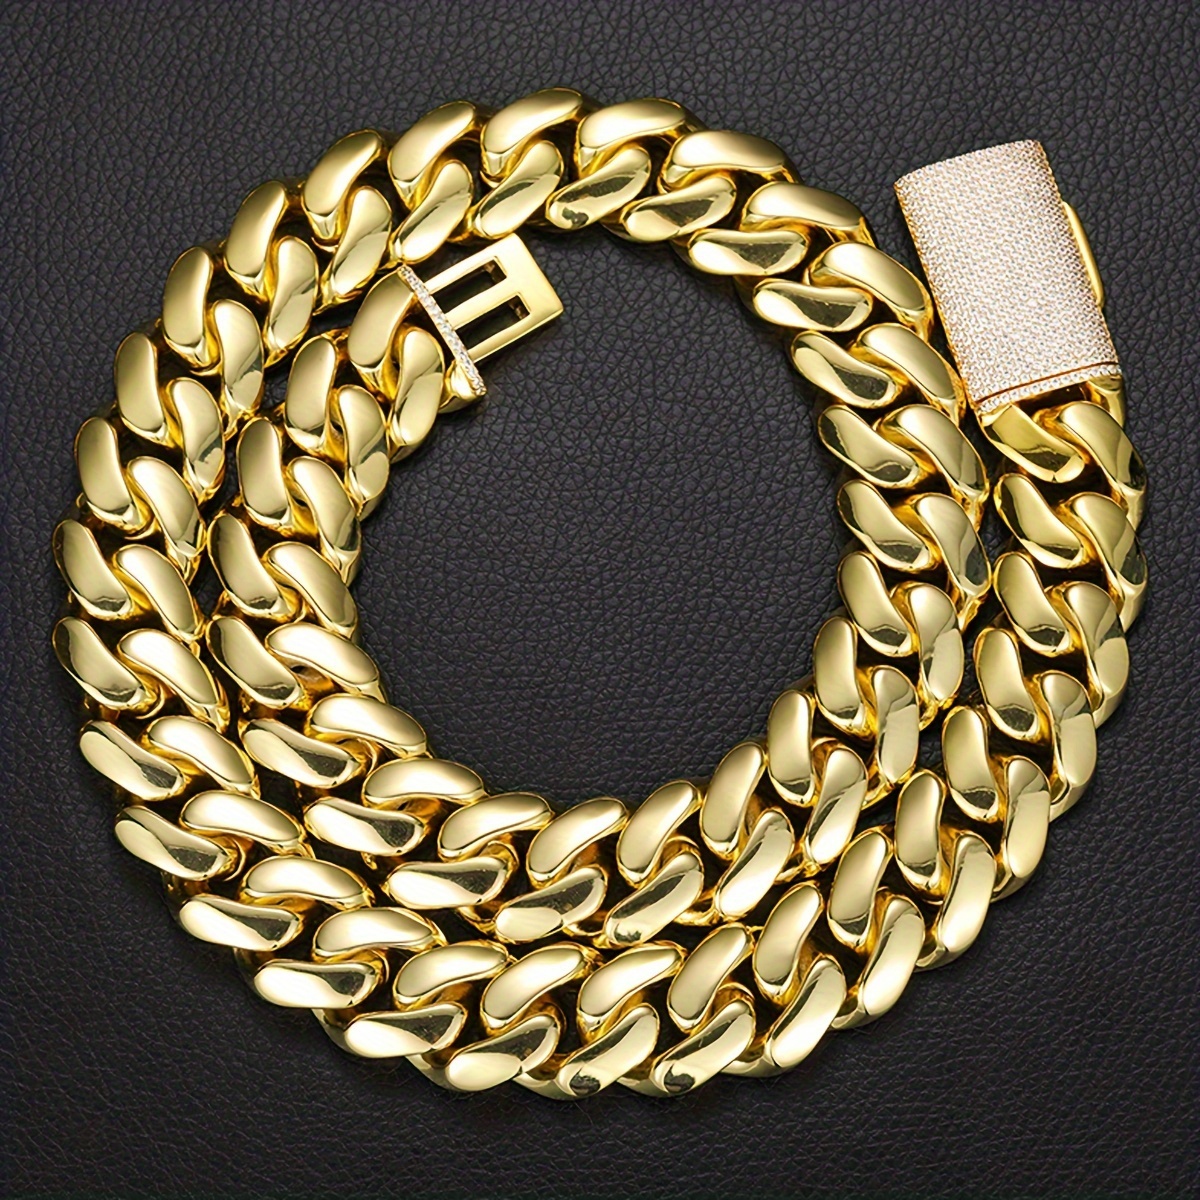 

Mens Stainless Steel Cuban Chain Fashion Golden Necklace Bracelet 8mm/10mm/12mm/14mm/18mm/20mm/22mm Width And 7.5 Inch To 30 Inch Length Optional